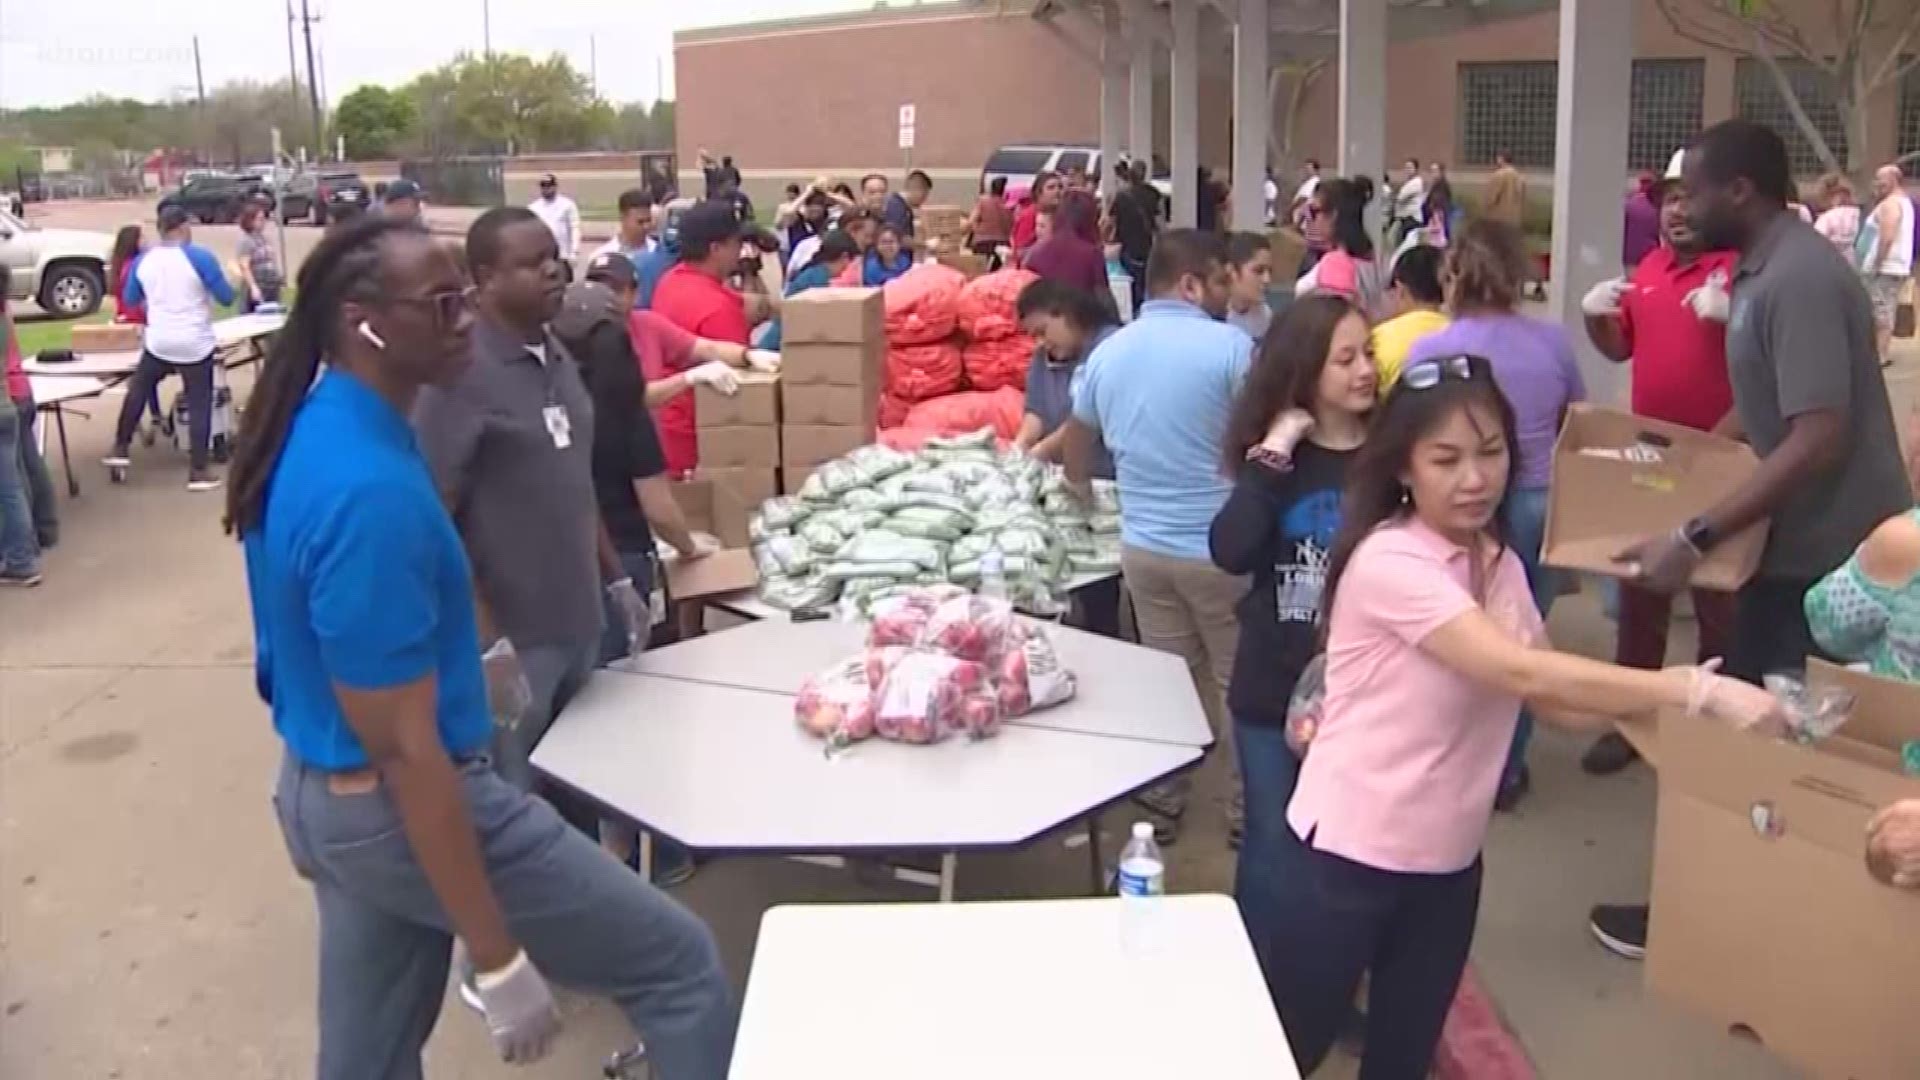 Houston ISD, Katy ISD, Tomball ISD and other districts are serving curbside meals this week.